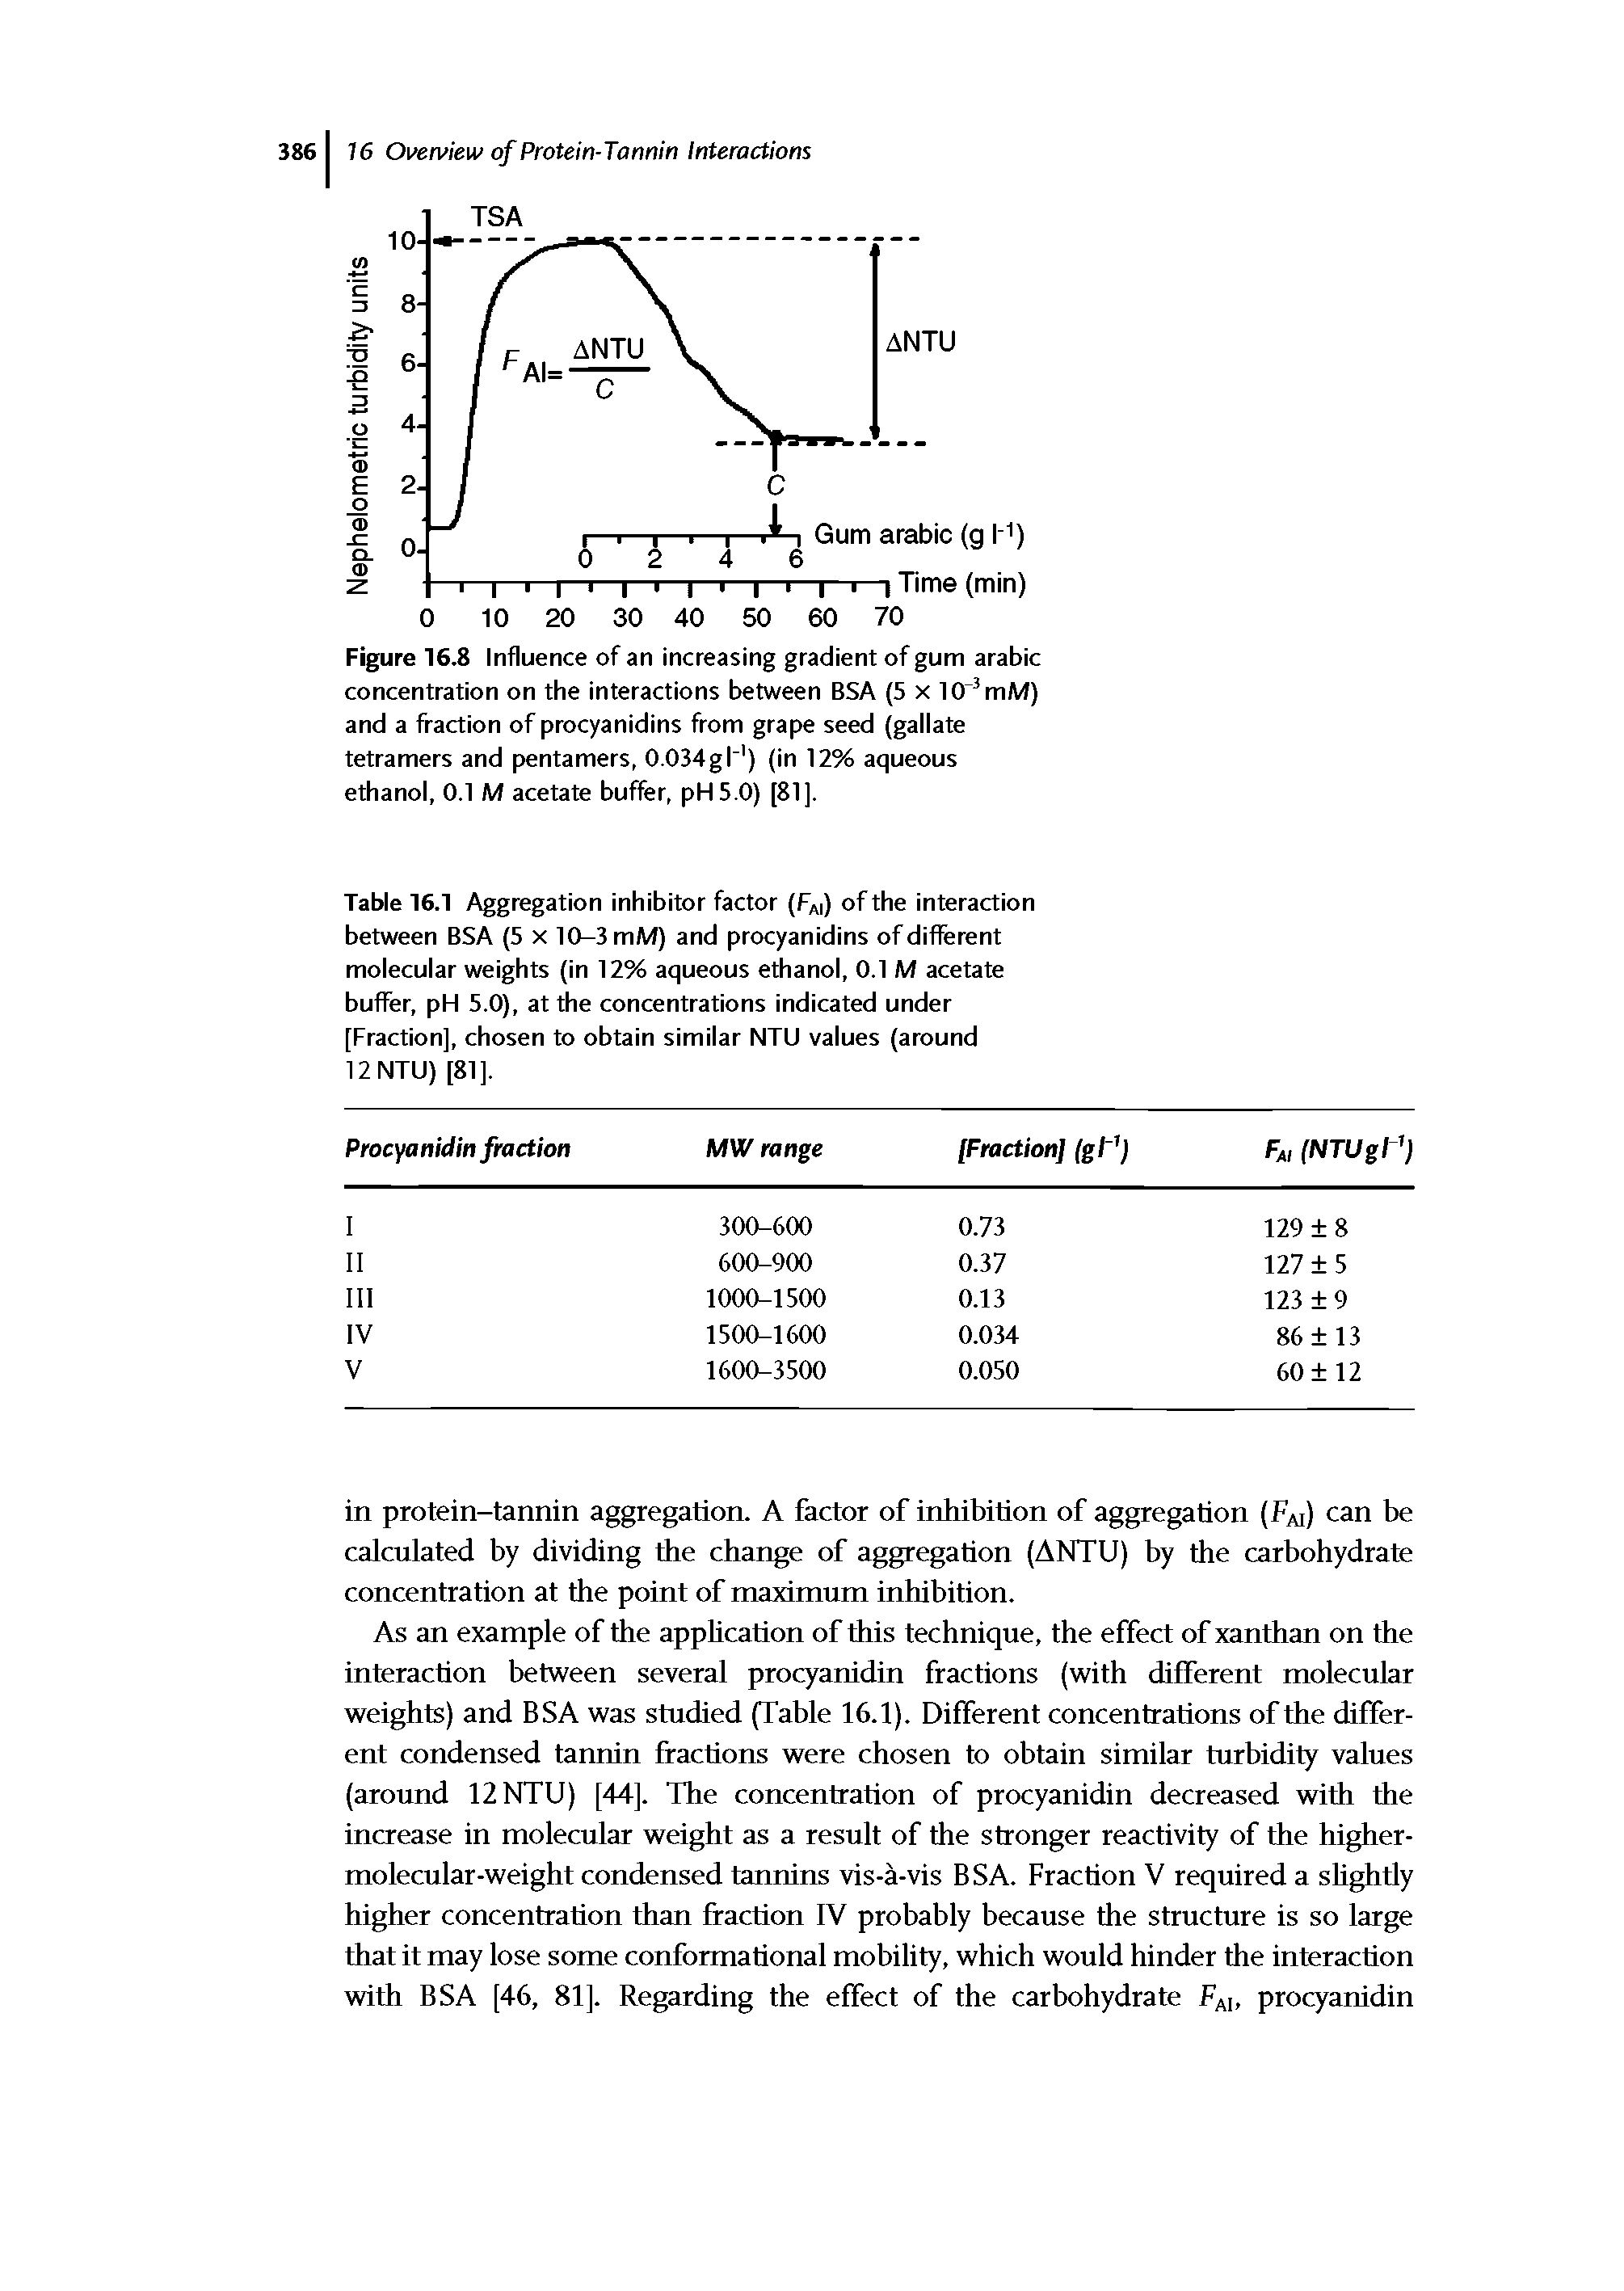 Table 16.1 Aggregation inhibitor factor (FA ) of the interaction between BSA (5 x 10-3 mM) and procyanidins of different molecular weights (in 12% aqueous ethanol, 0.1 M acetate buffer, pH 5.0), at the concentrations indicated under [Fraction], chosen to obtain similar NTU values (around 12 NTU) [81].